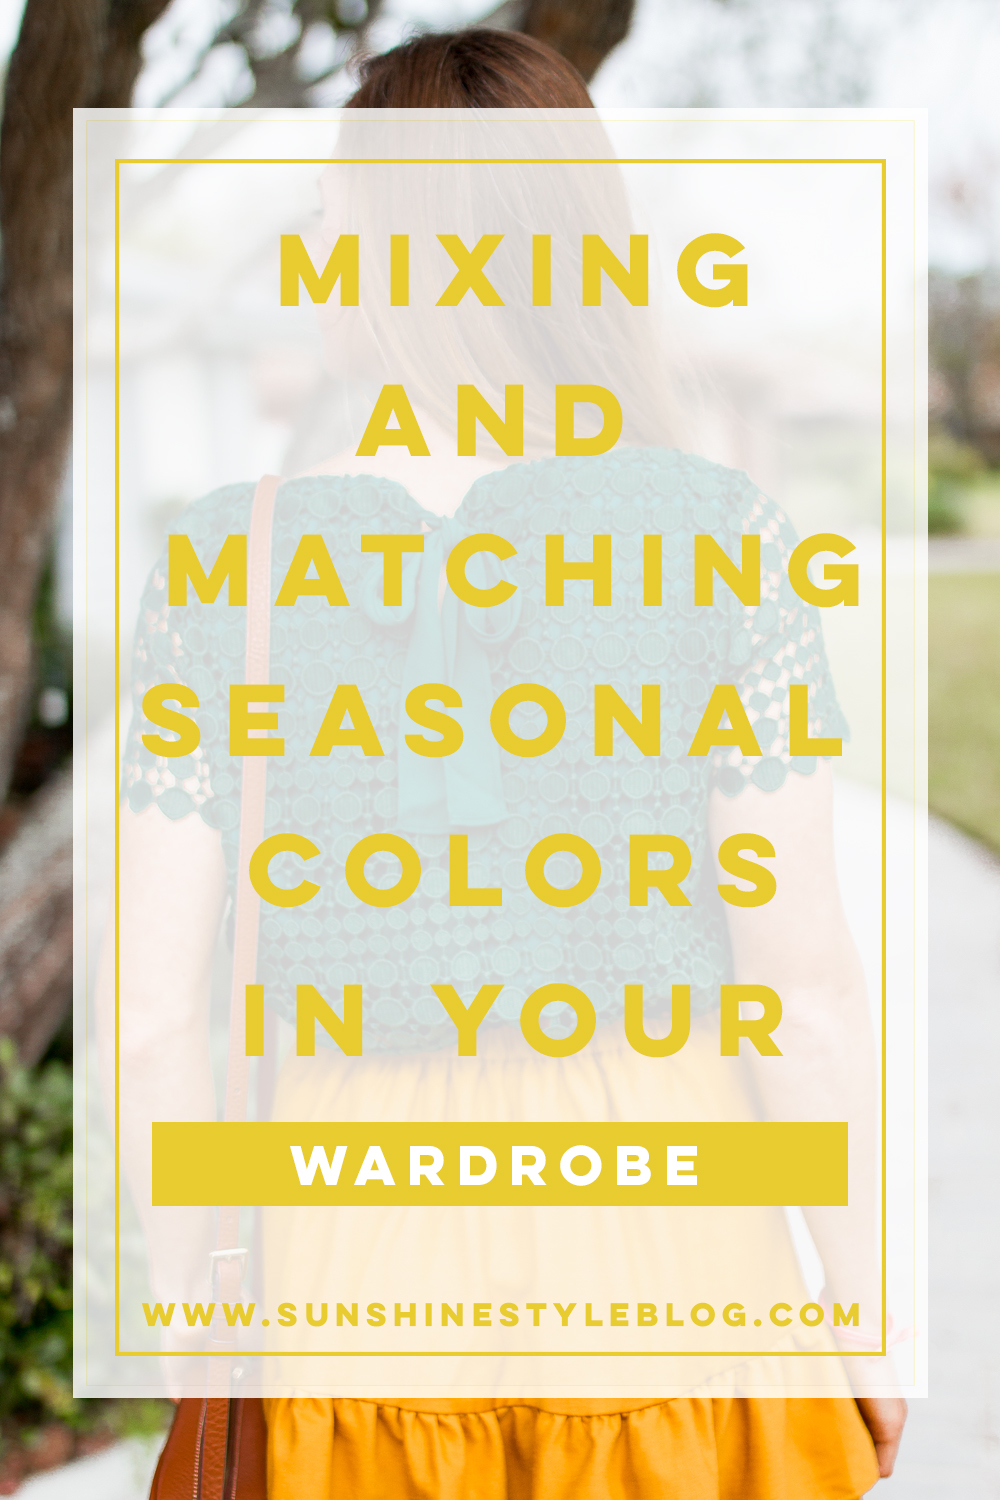 Mixing and Matching Seasonal Colors into Your Wardrobe | How to Dress for Fall | How to Incorporate Fall Colors in Your Wardrobe | Fall Outfit Ideas 2018 - Sunshine Style